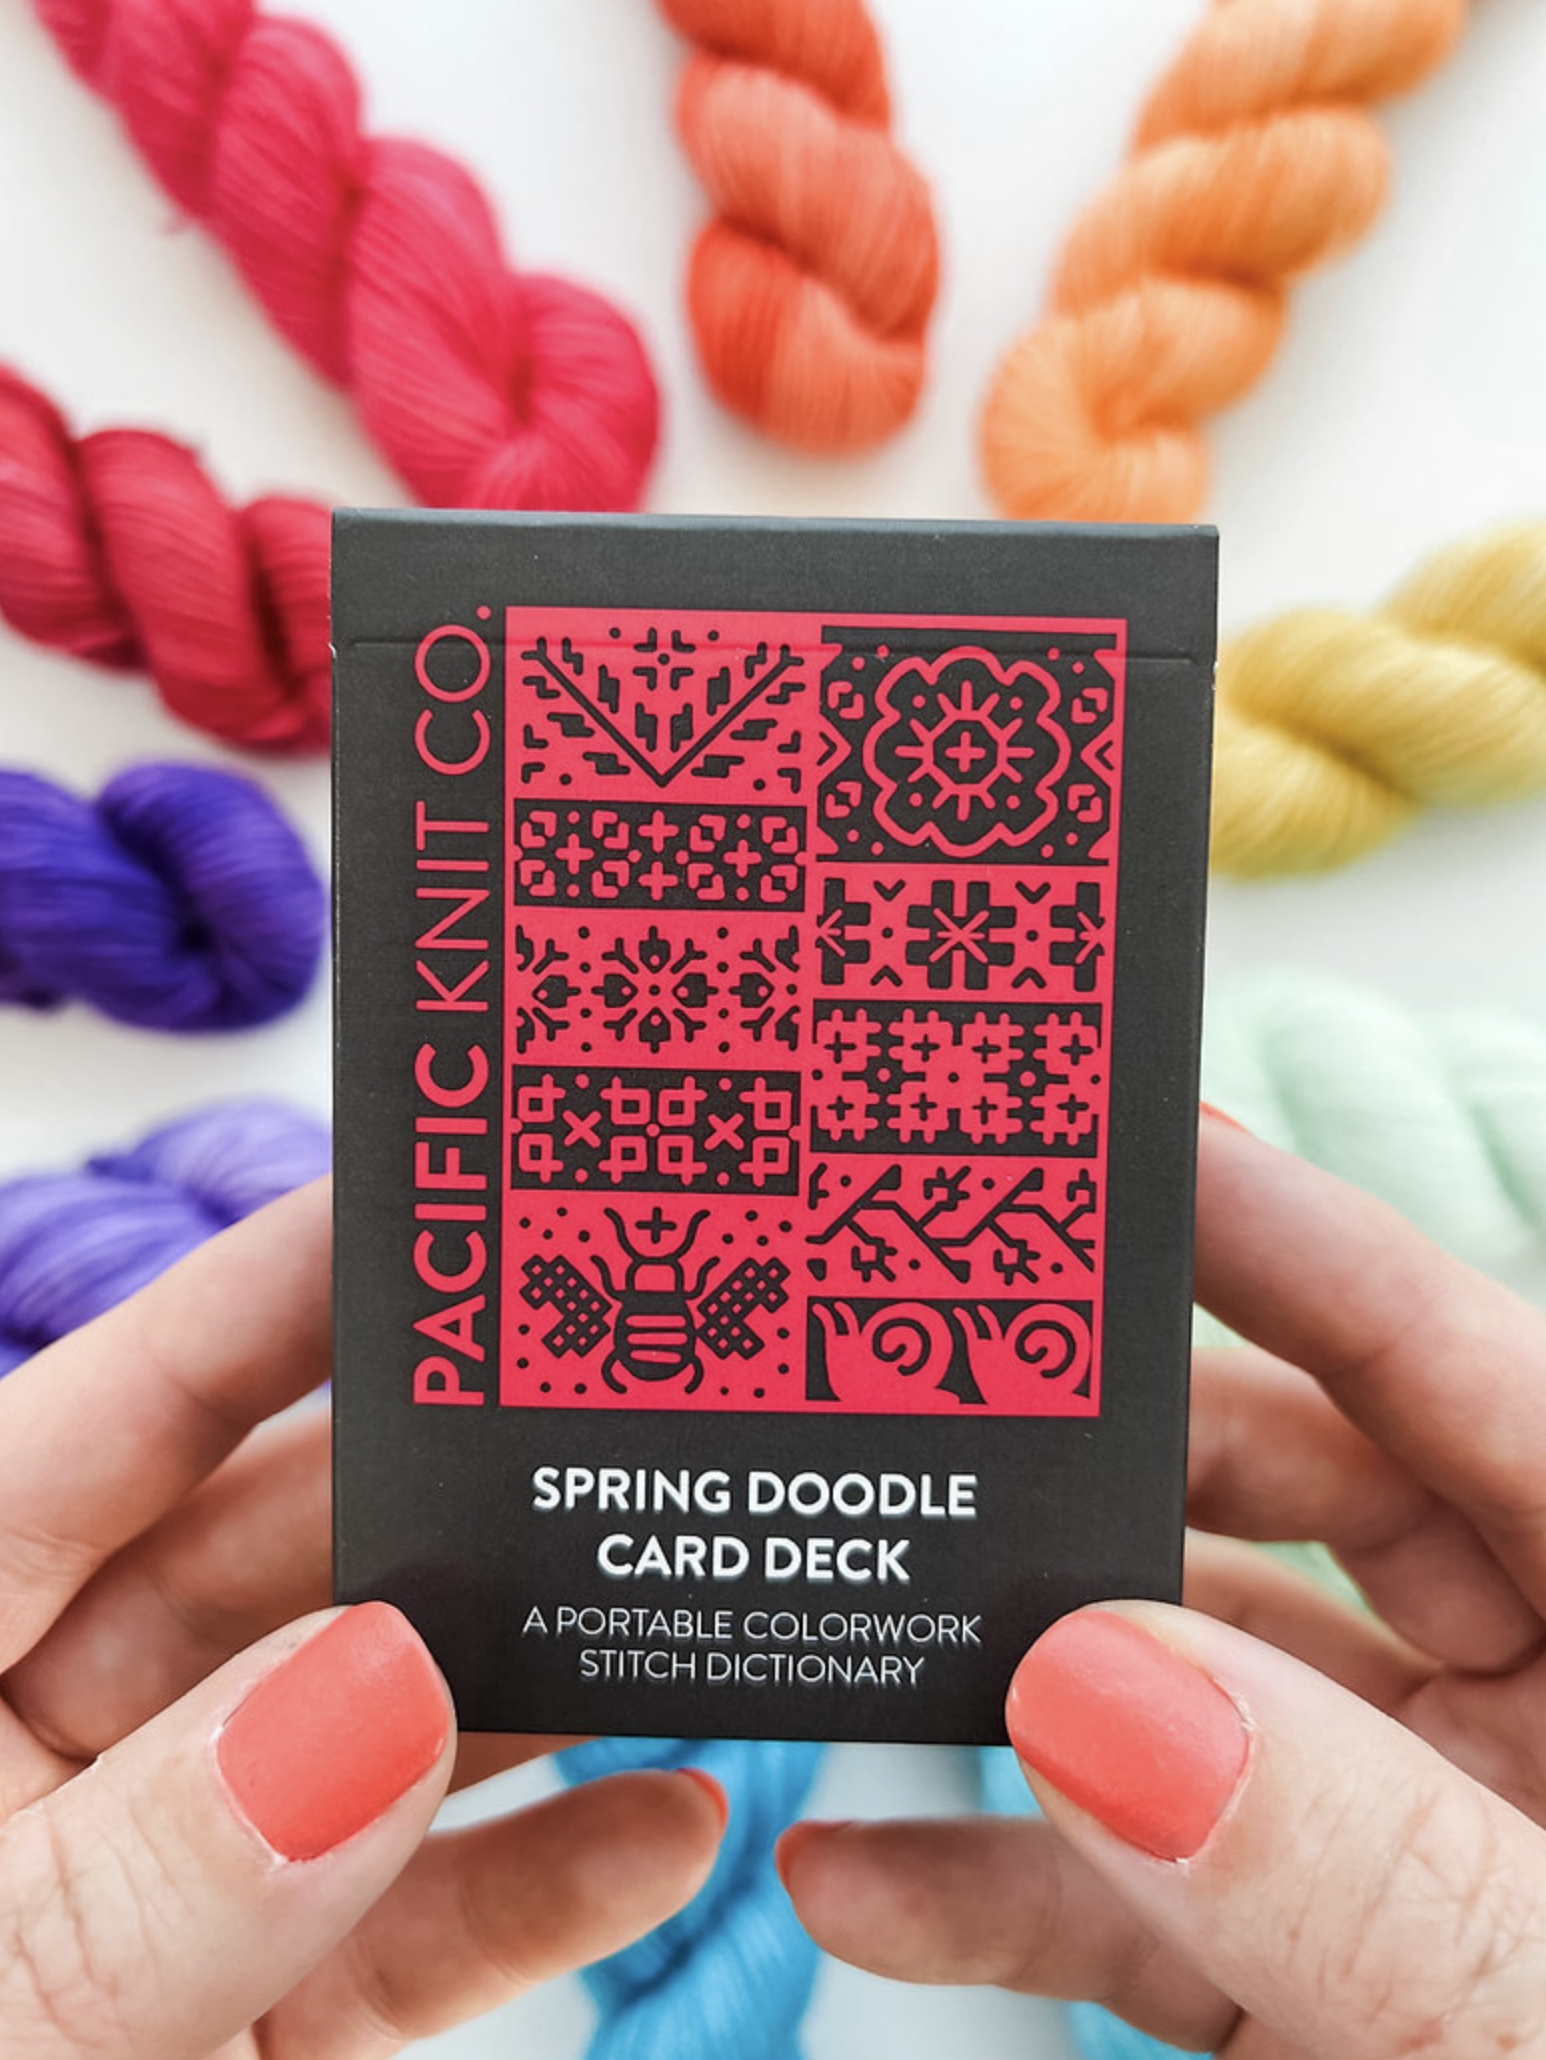 Doodle Deck Spring by Pacific Knit Co